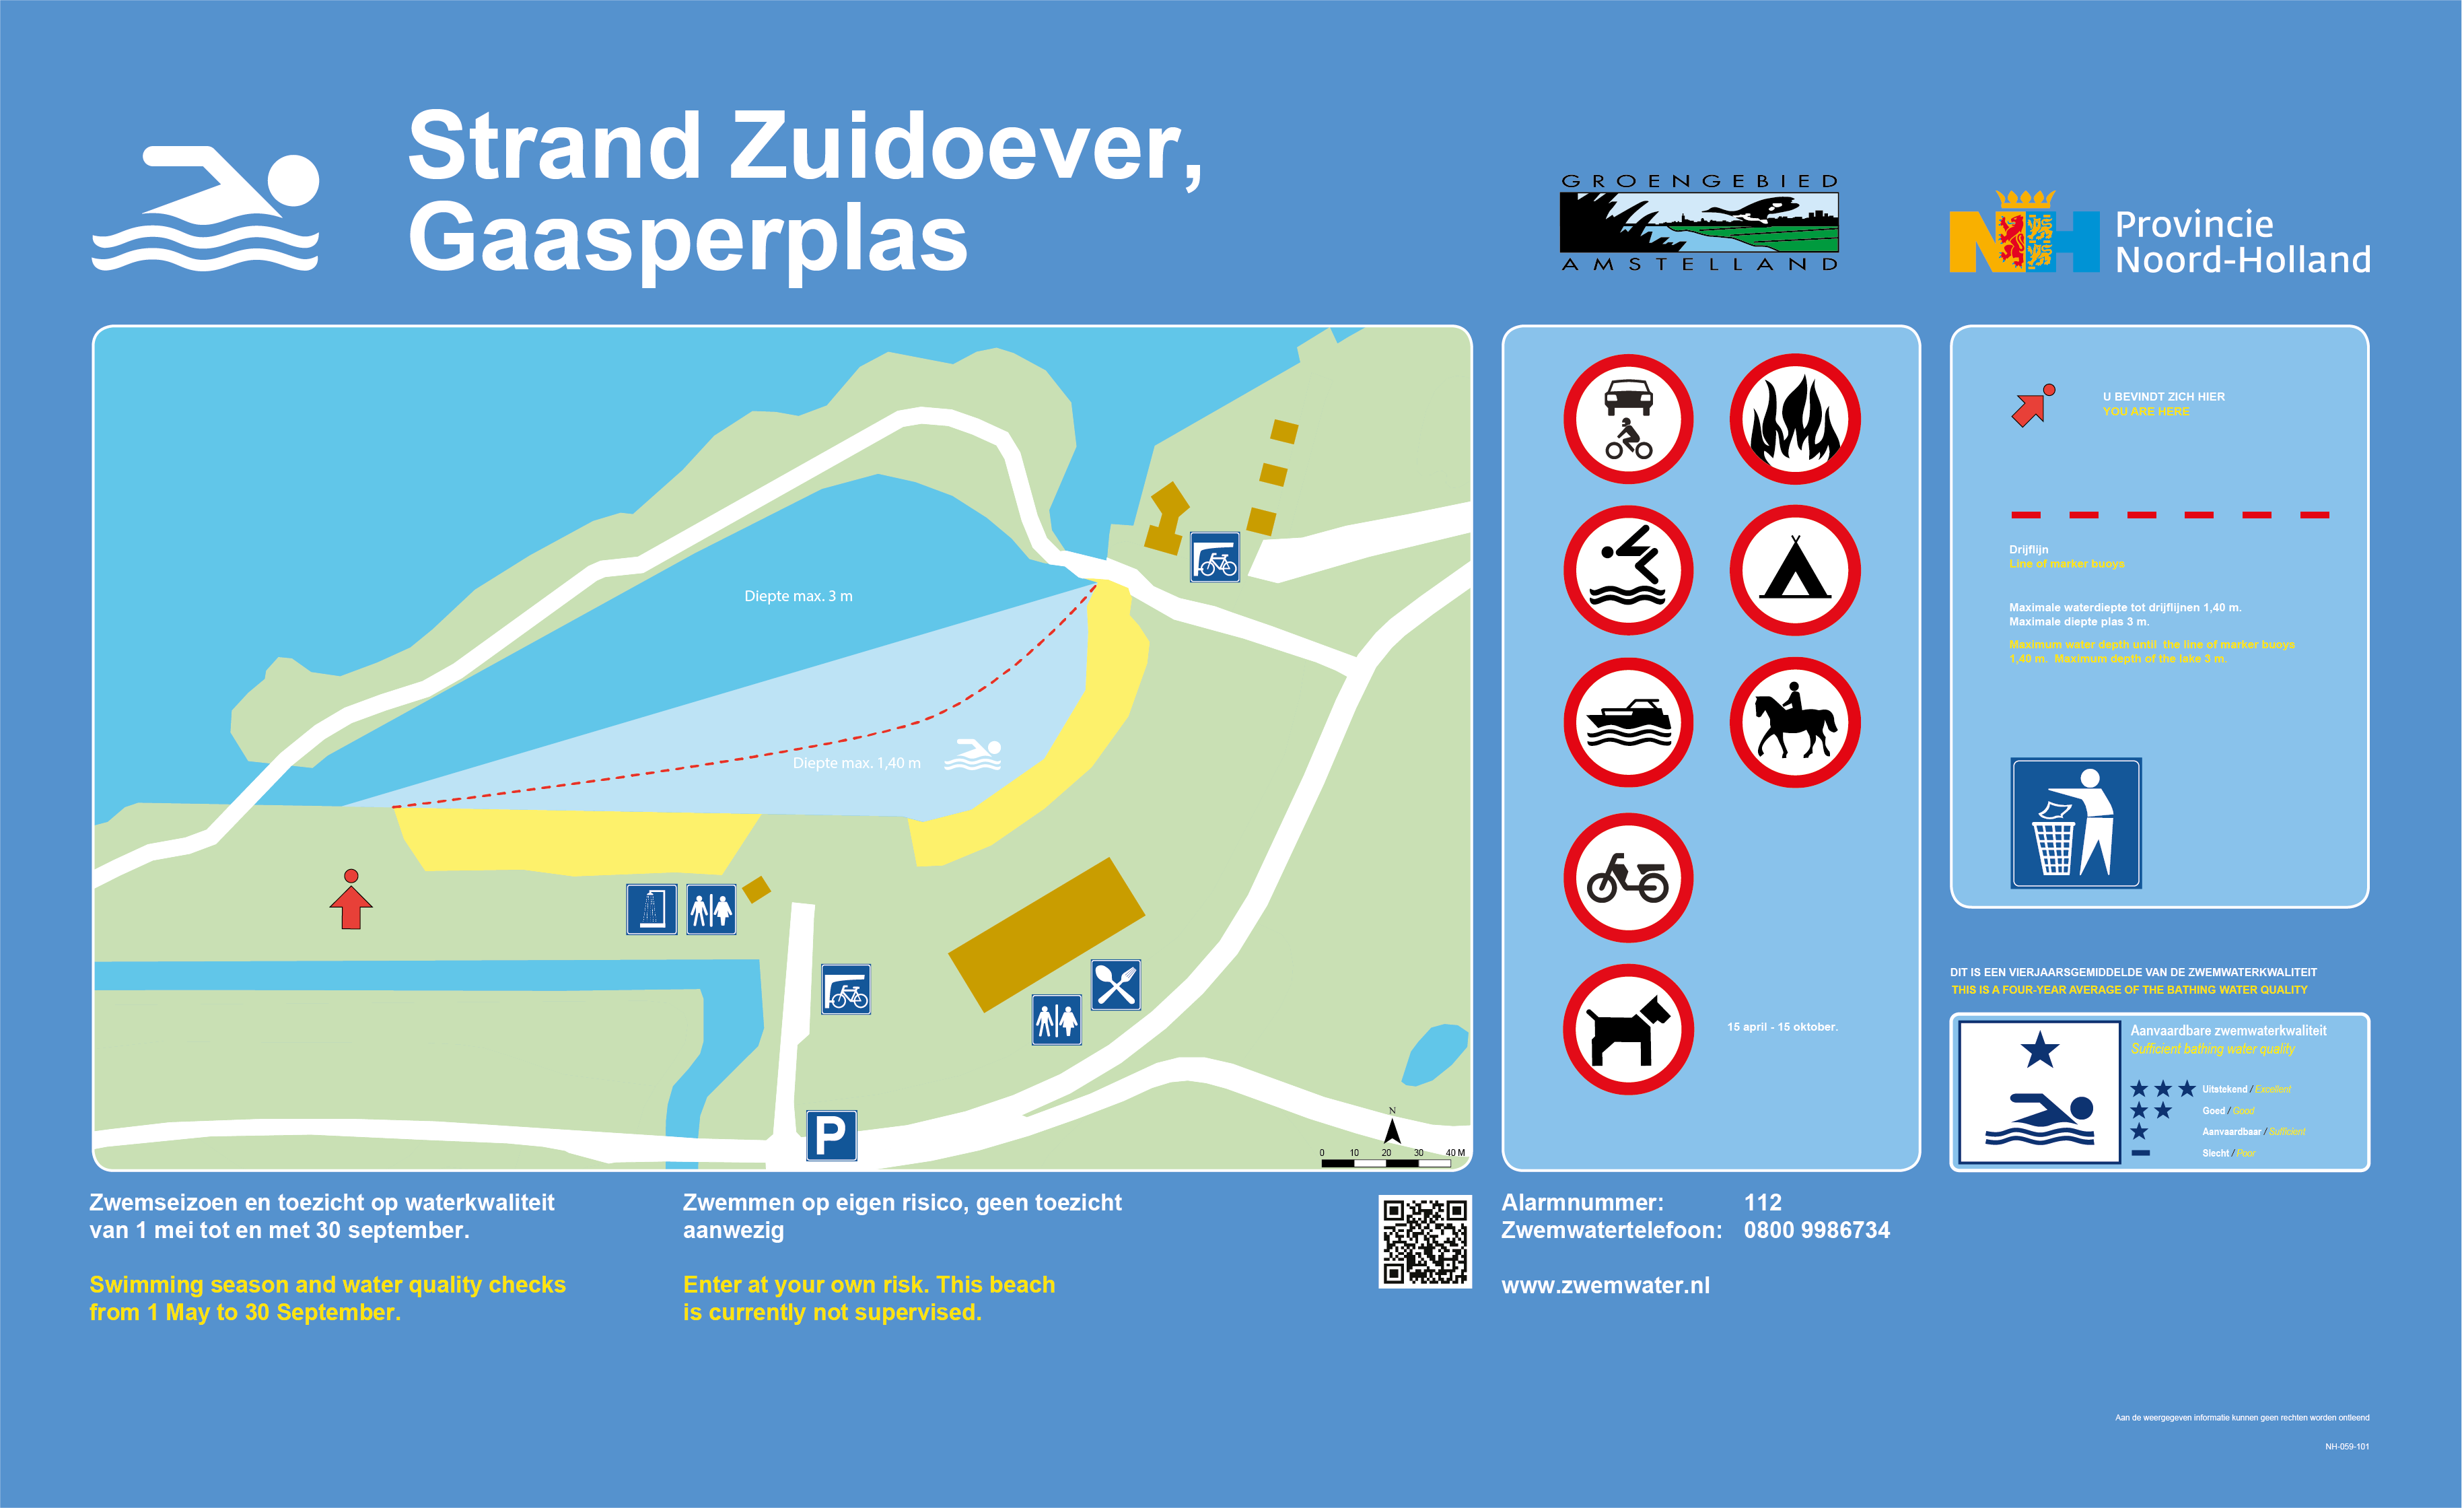 The information board at the swimming location Strand Zuidoever, Gaasperplas